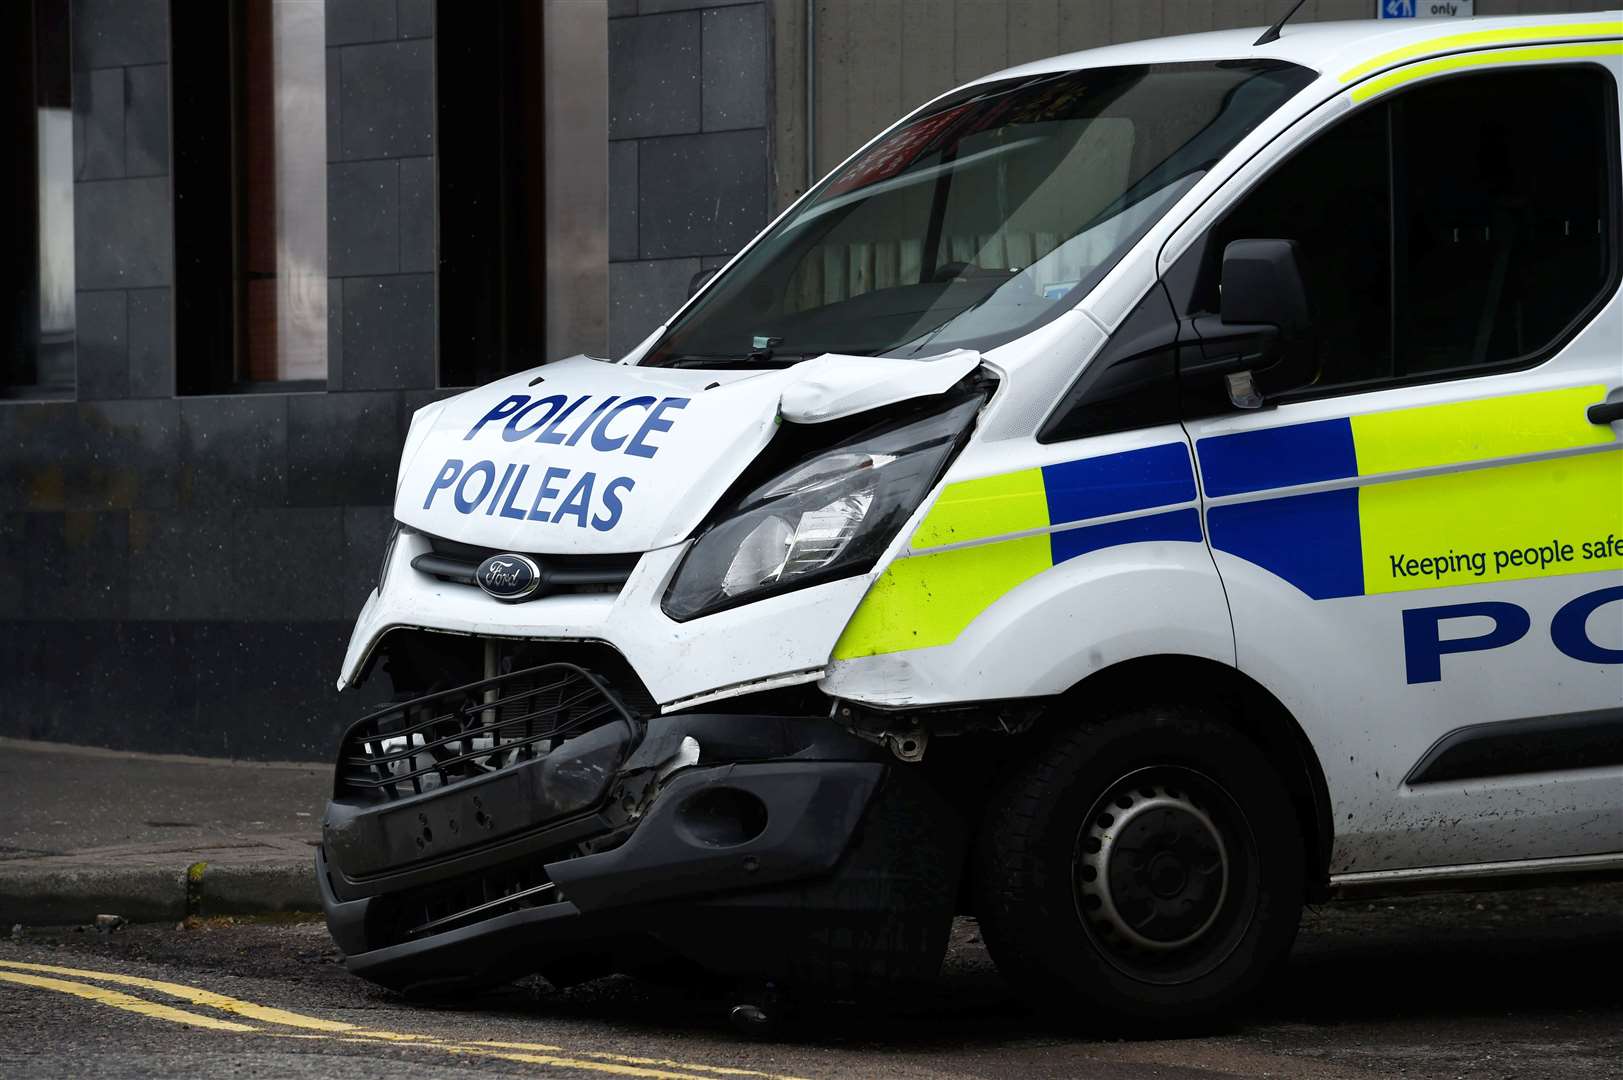 The damaged police van after this morning's accident at Ness Bridge.